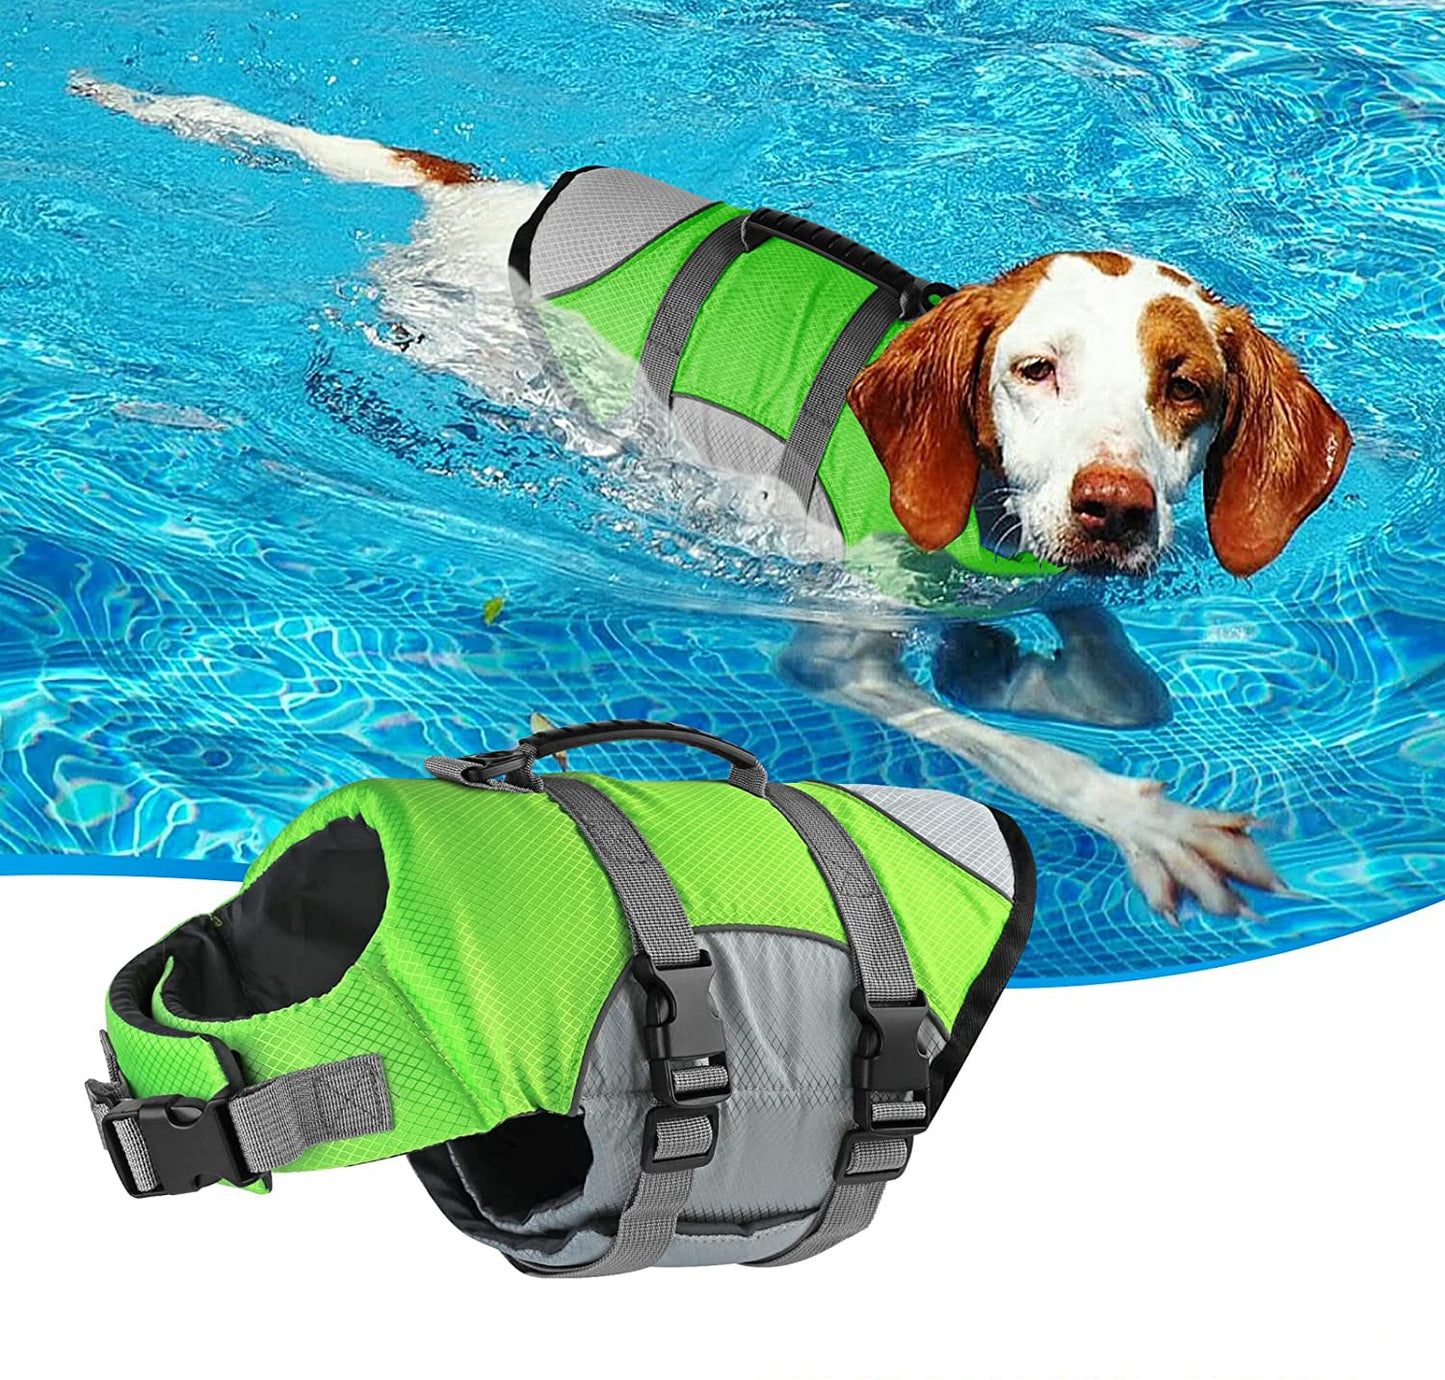 Reflective Dog Life Jacket Sport Safety Rescue Vest Dog Clothes Adjustable Vests Puppy Float Swimming Suit for All Pet Dogs